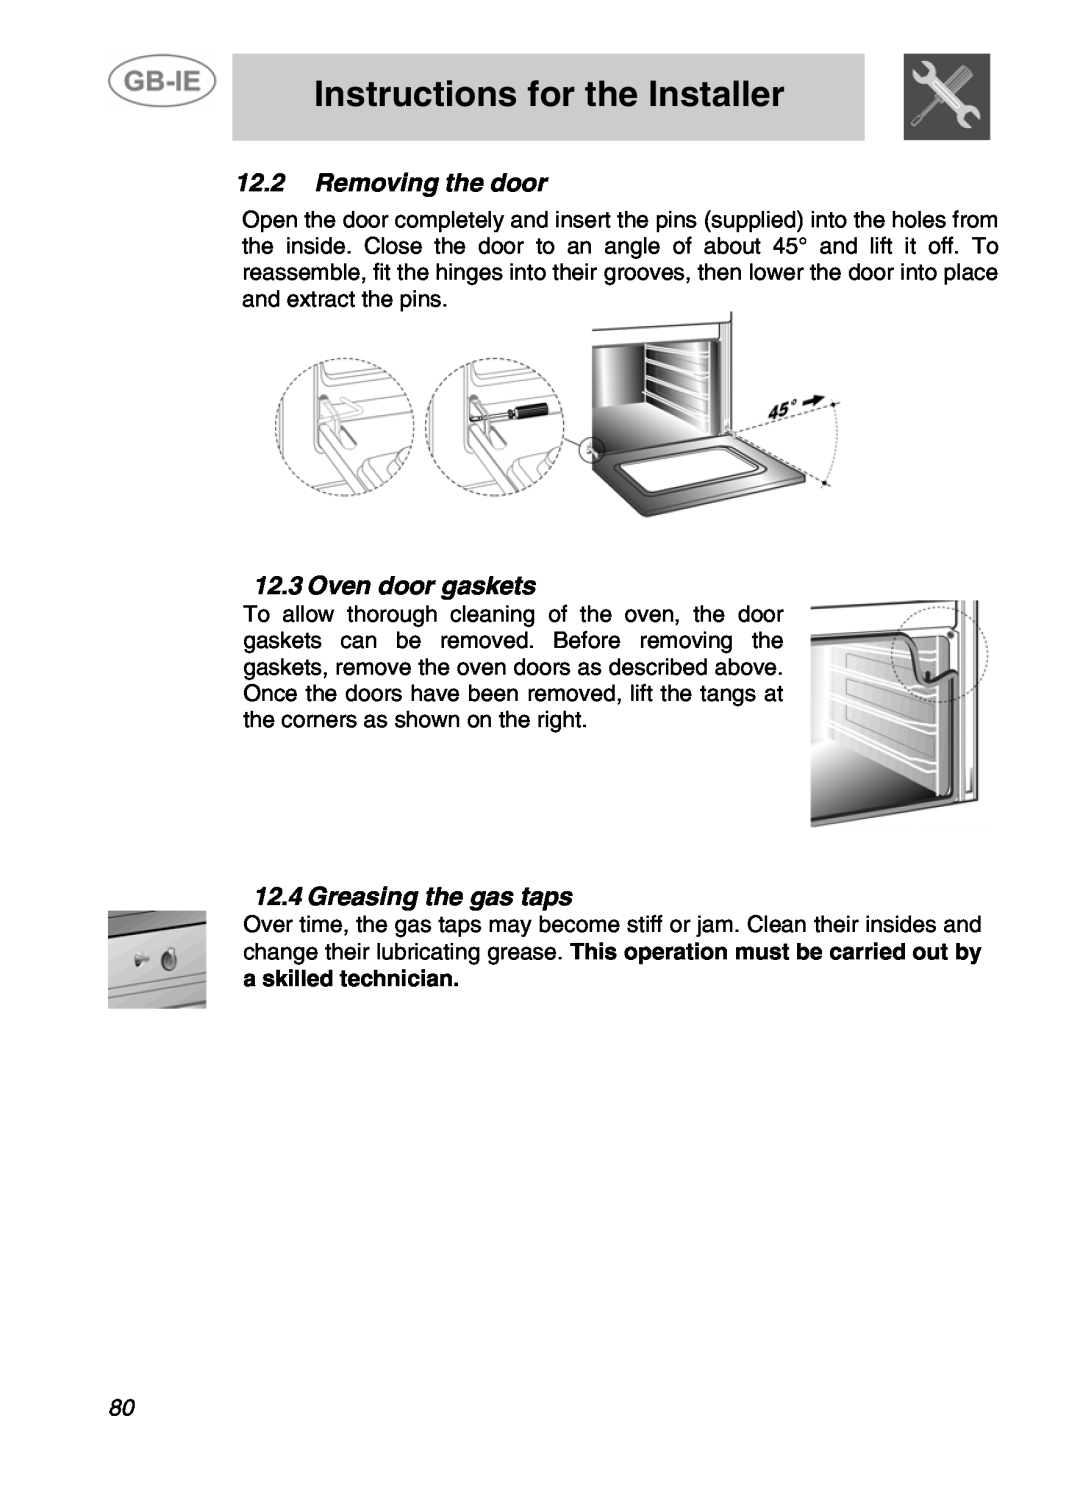 Smeg A4-5 manual 12.2Removing the door, Oven door gaskets, Greasing the gas taps, Instructions for the Installer 